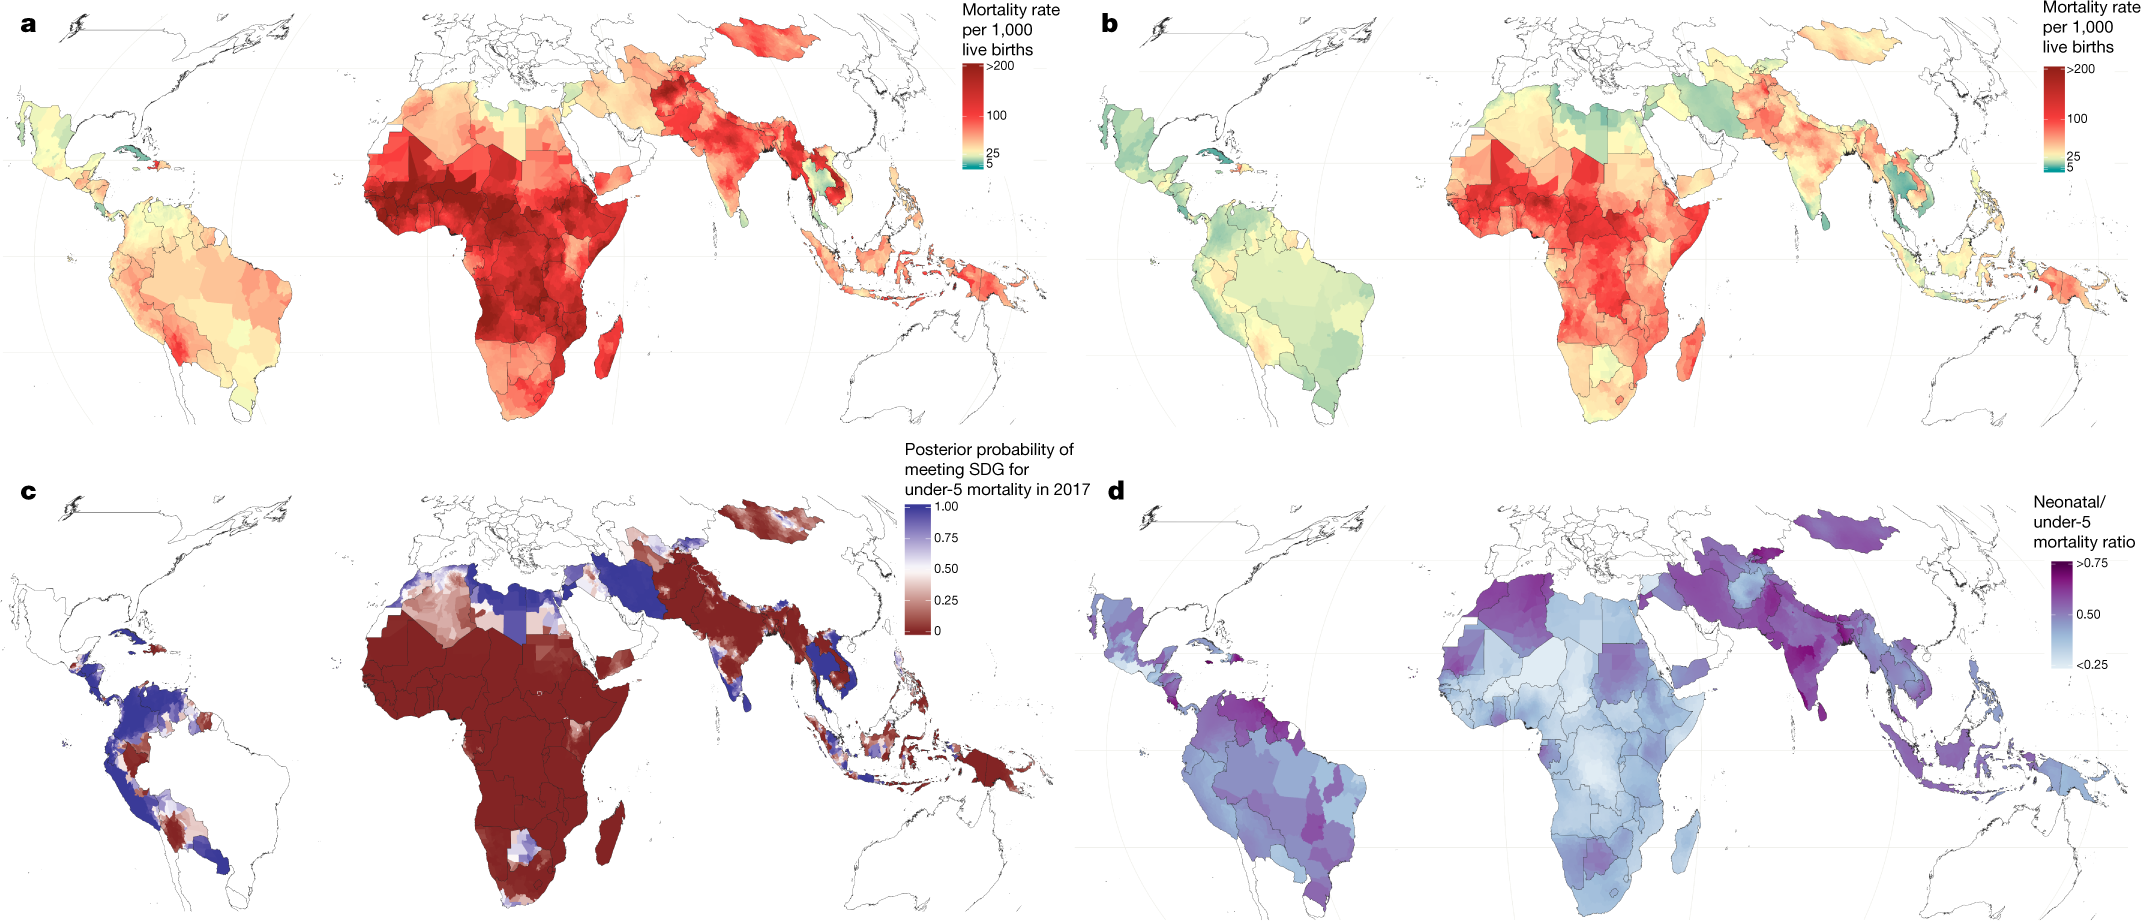 Mapping 123 million neonatal, infant and child deaths between 2000 and 2017  | Nature